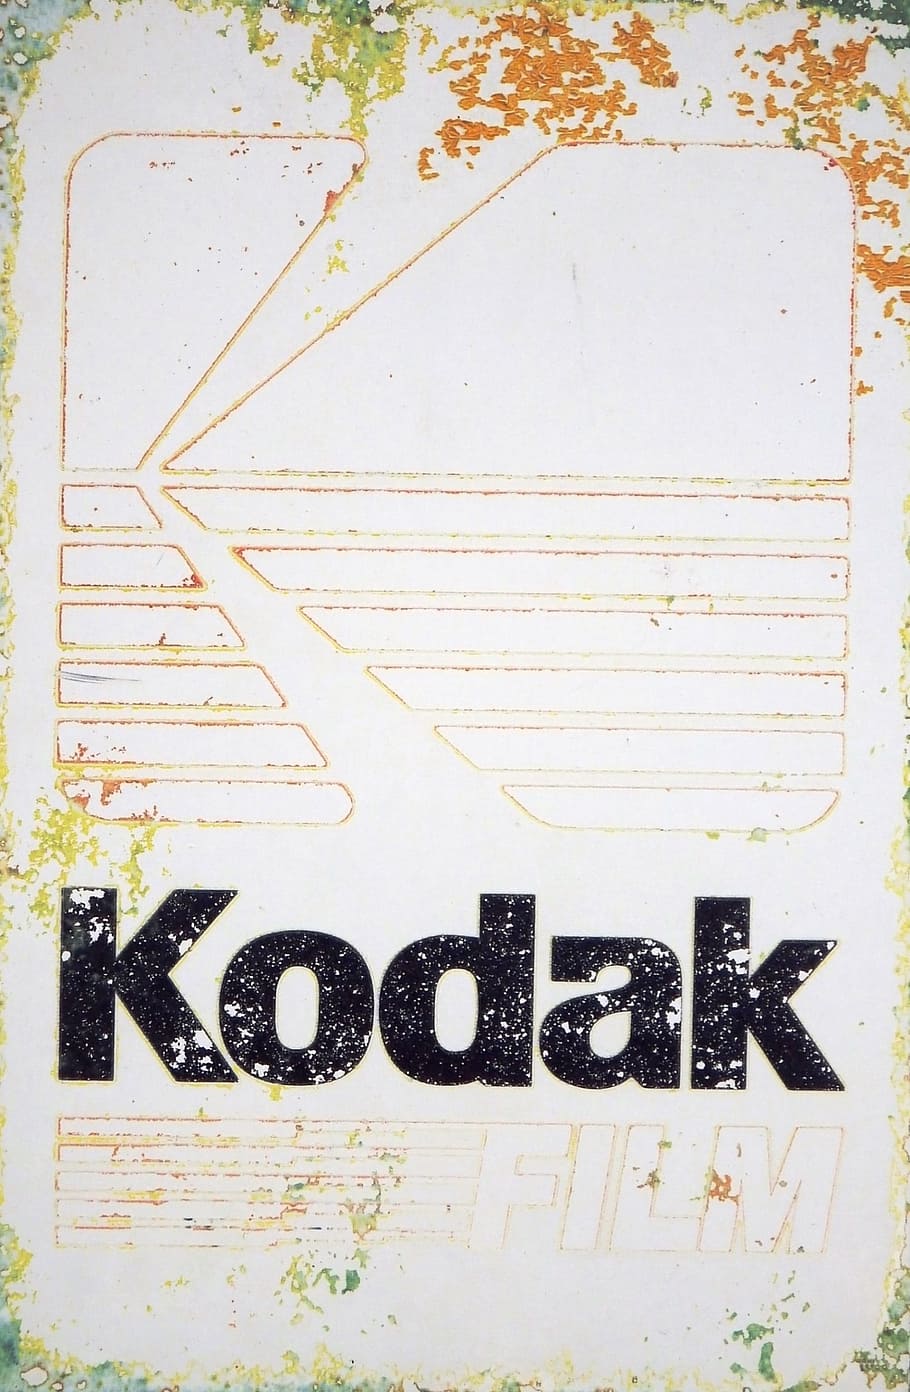 Vintage aged advertising sign board for the Kodak camera brand - Editorial Use Only